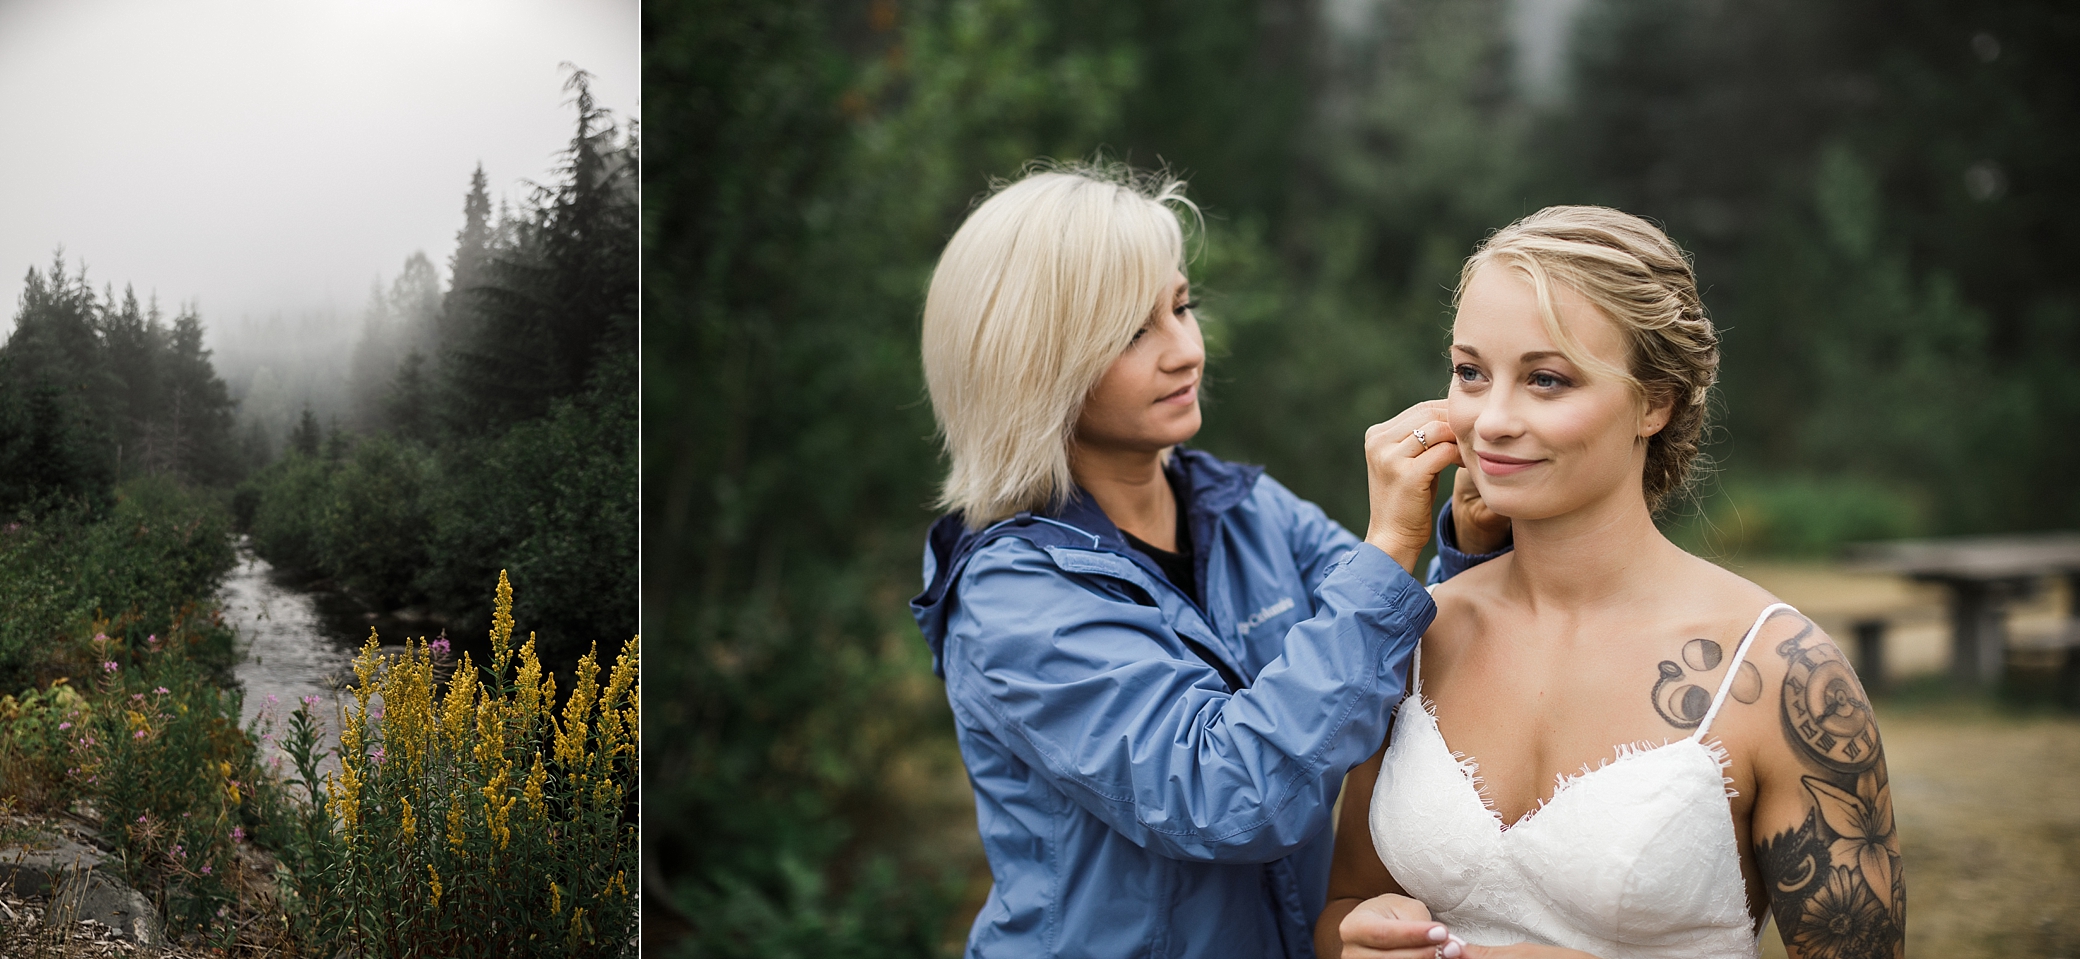 Bride getting ready for intimate elopement ceremony at Gold Creek Pond | Megan Montalvo Photography